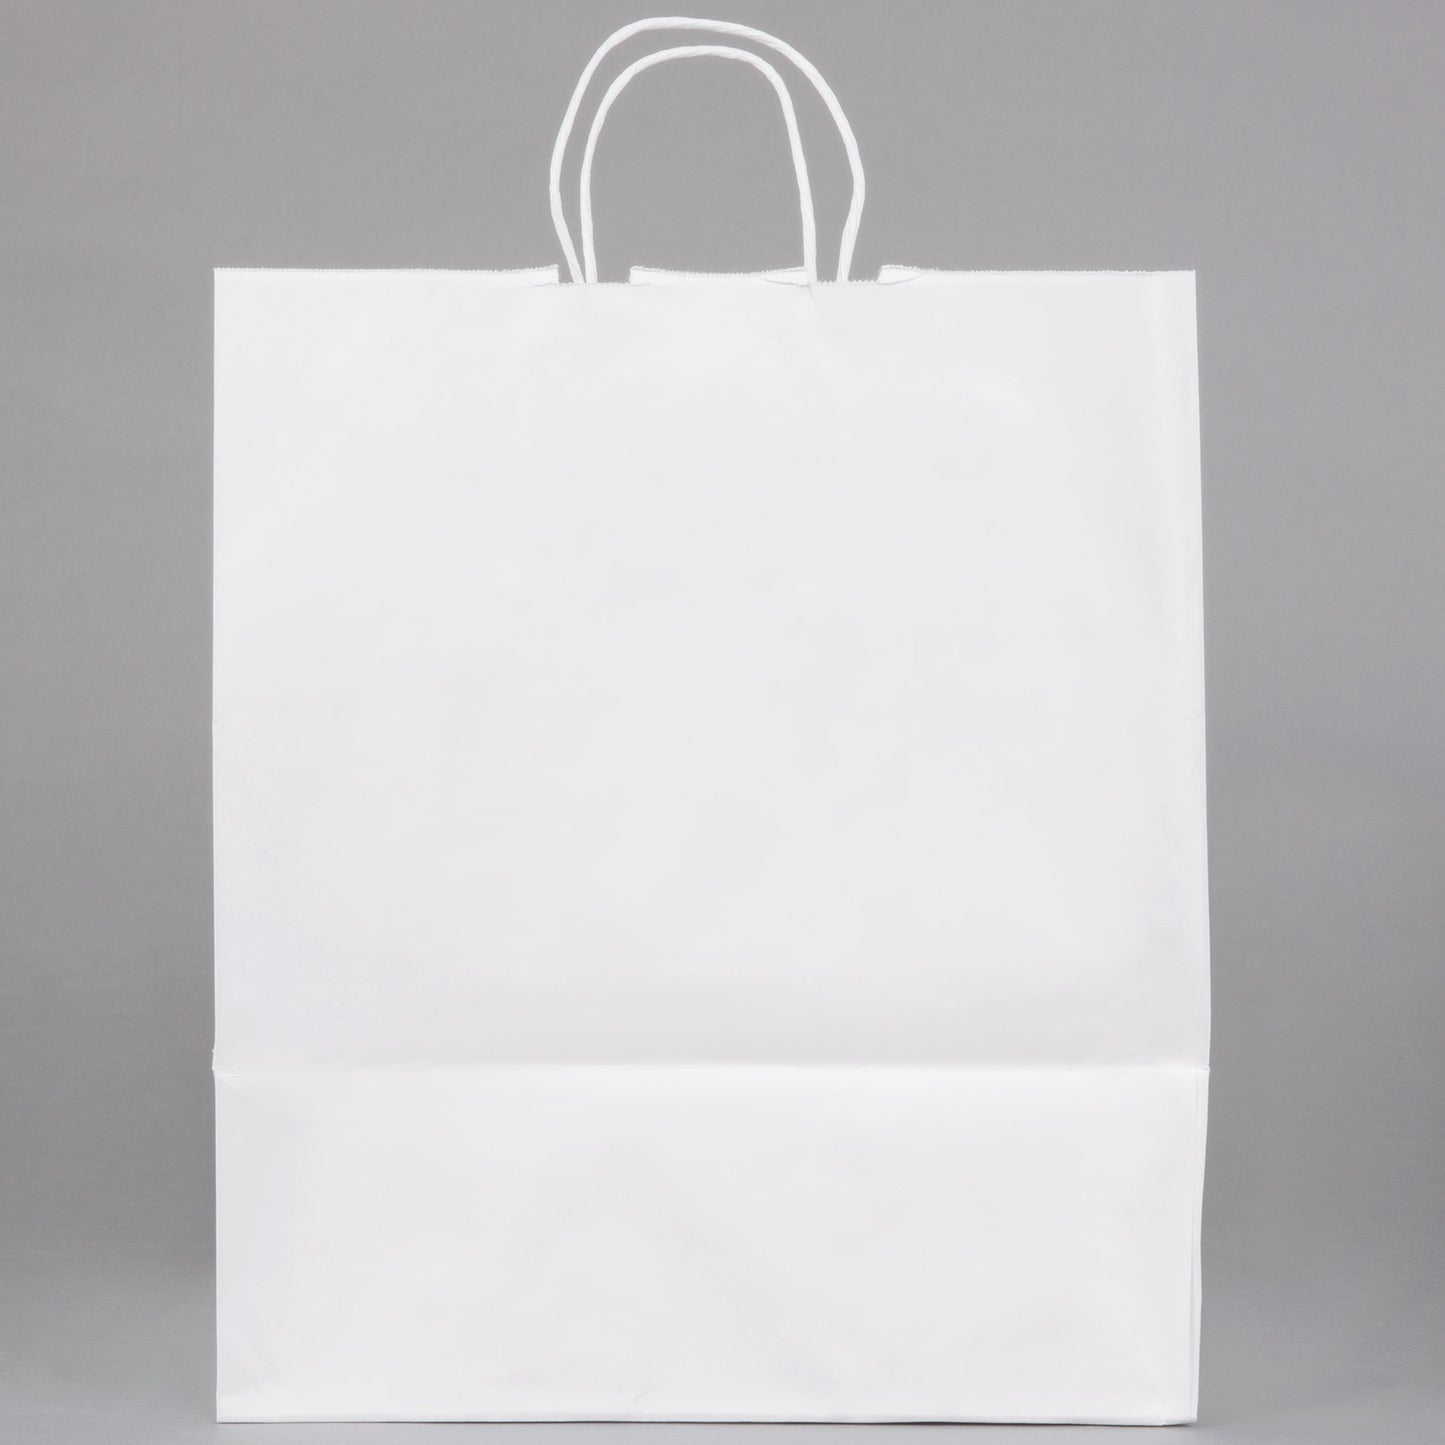 These Eco-friendly 8in x 4.5in x 10.25in Duro Bag® 60# White Tempo Paper Shopping Bags with gusseted flat bottom and paper twist handles ares sold 200 per bundle.